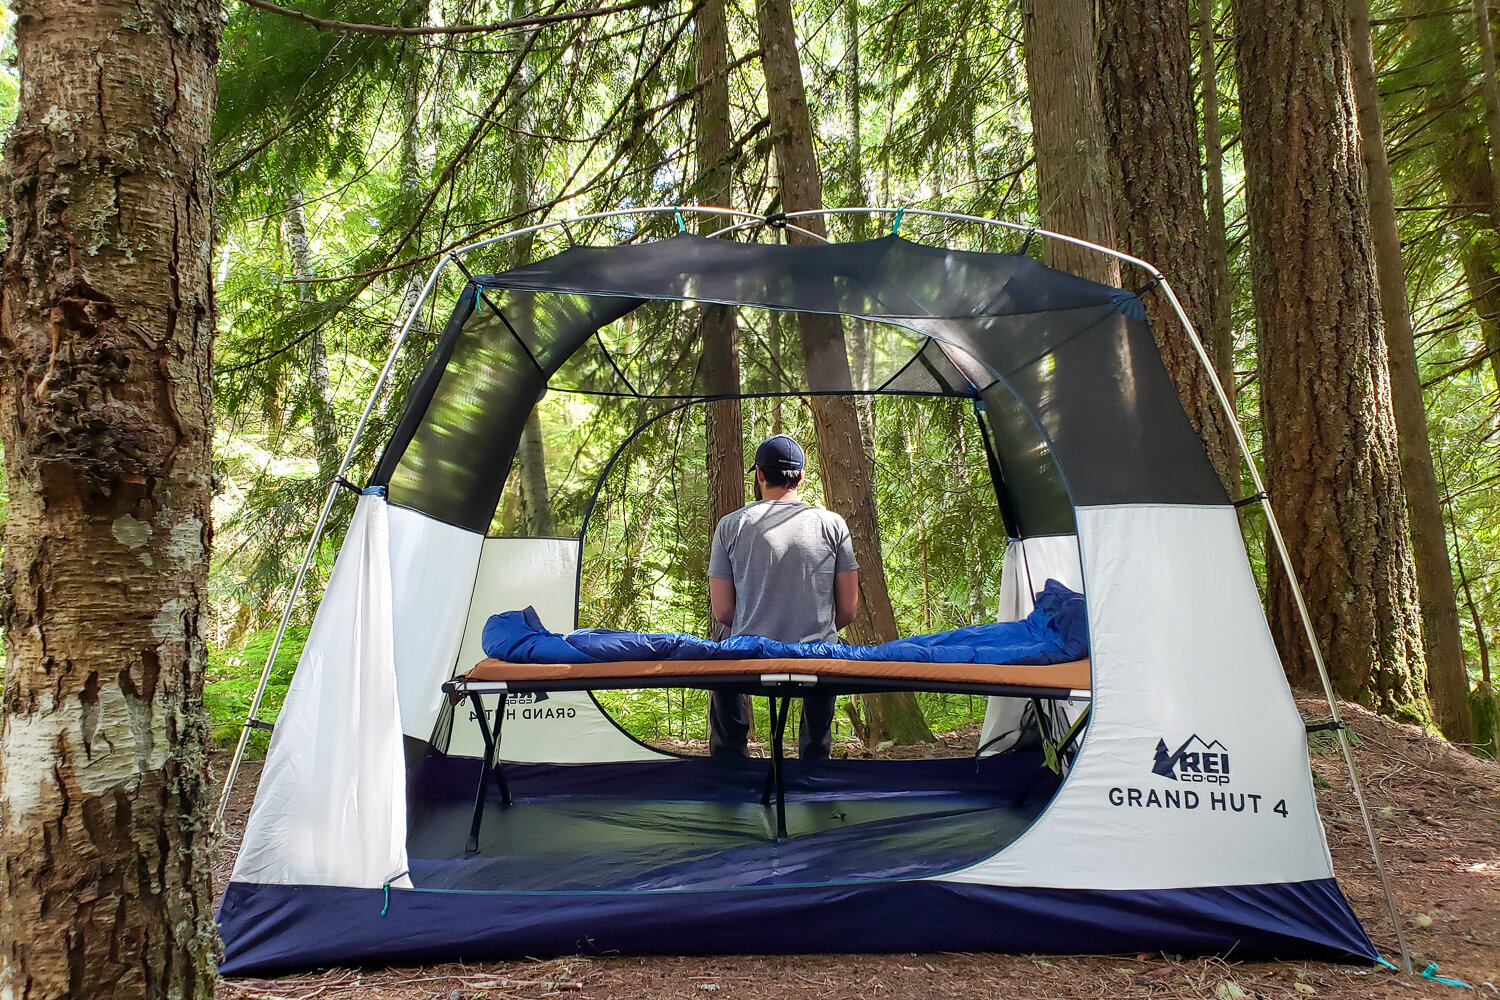 Adding a cot, like the TETON Sport Camp Cot, provides extra comfort and it can double as a seat.